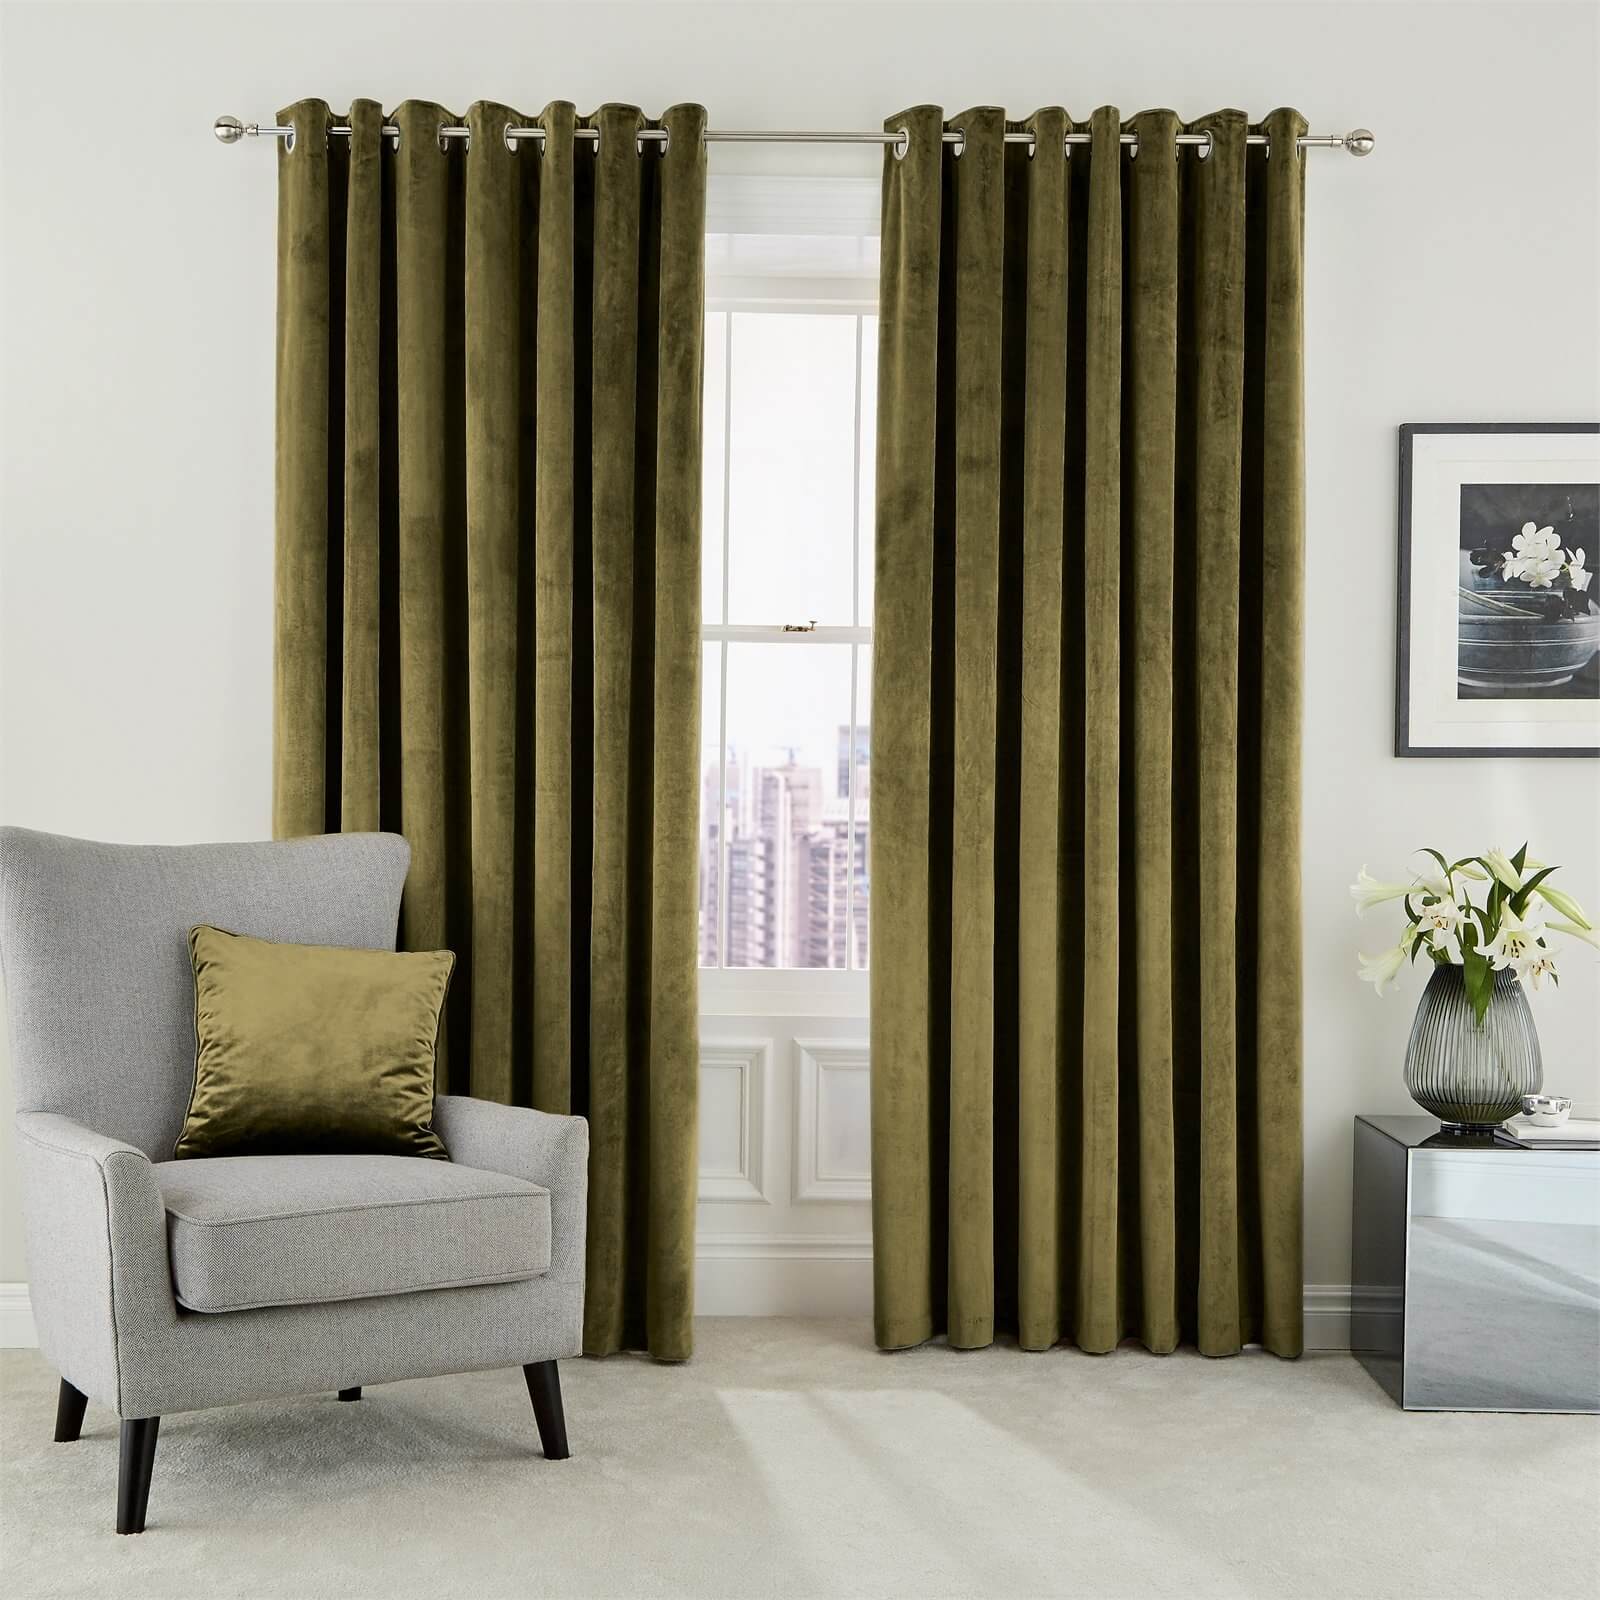 Peacock Blue Hotel Collection Escala Lined Curtains 66 x 54 - Olive